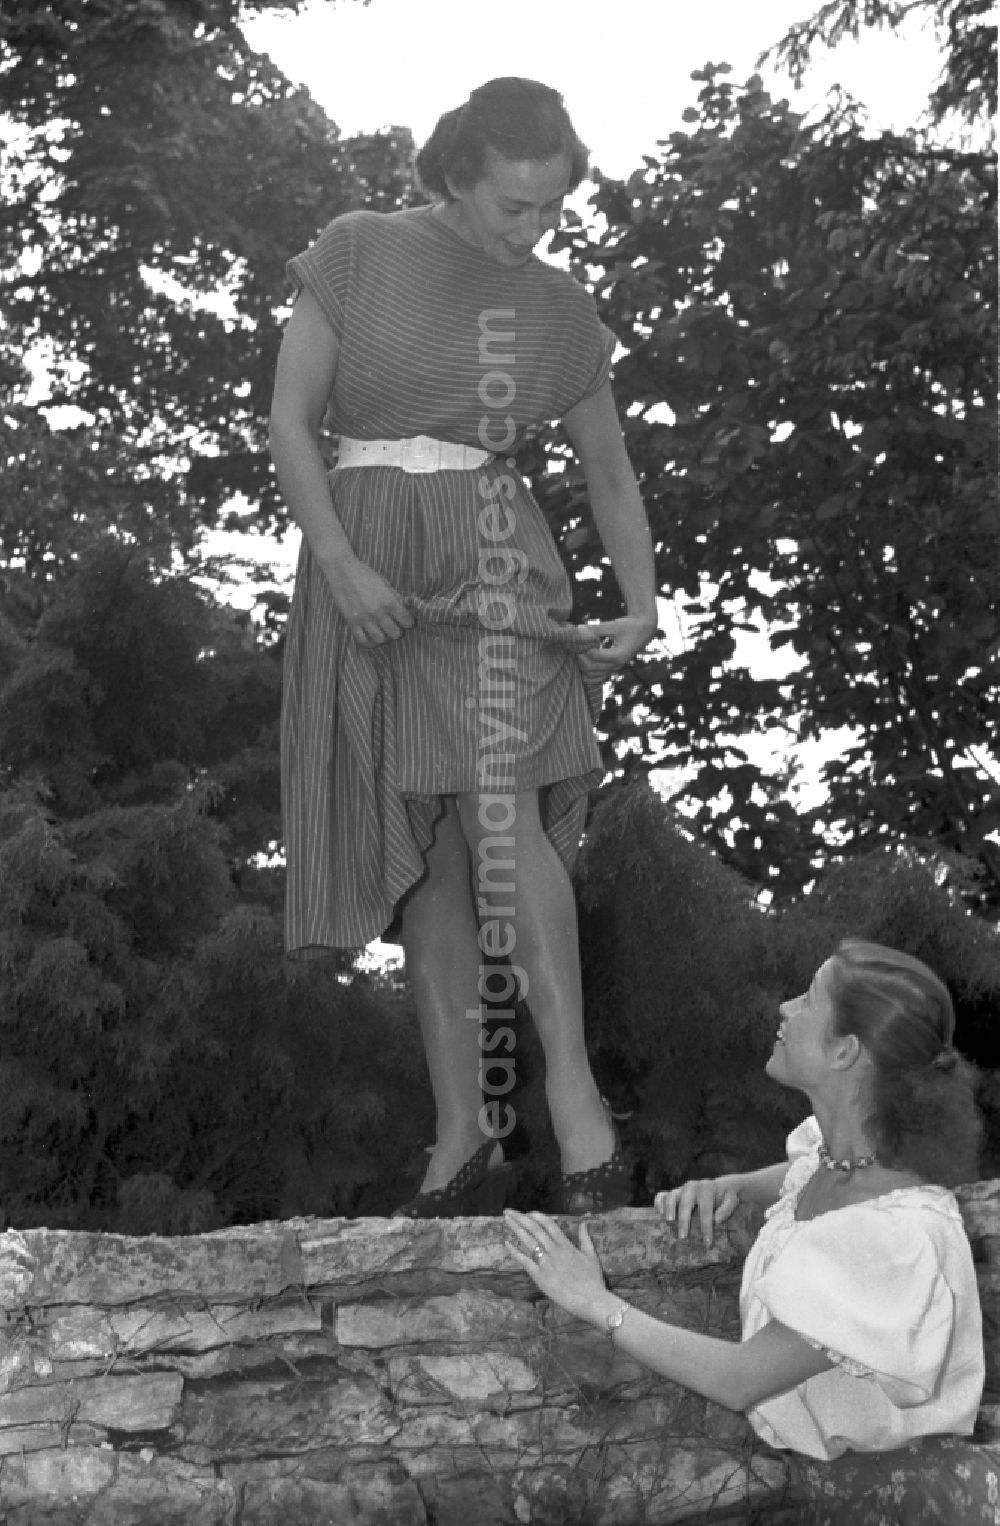 GDR photo archive: Berlin - Young woman presents current women's fashion collection mit Nylonstruempfen - Perlonstruempfen in the district Friedrichshain in Berlin Eastberlin on the territory of the former GDR, German Democratic Republic